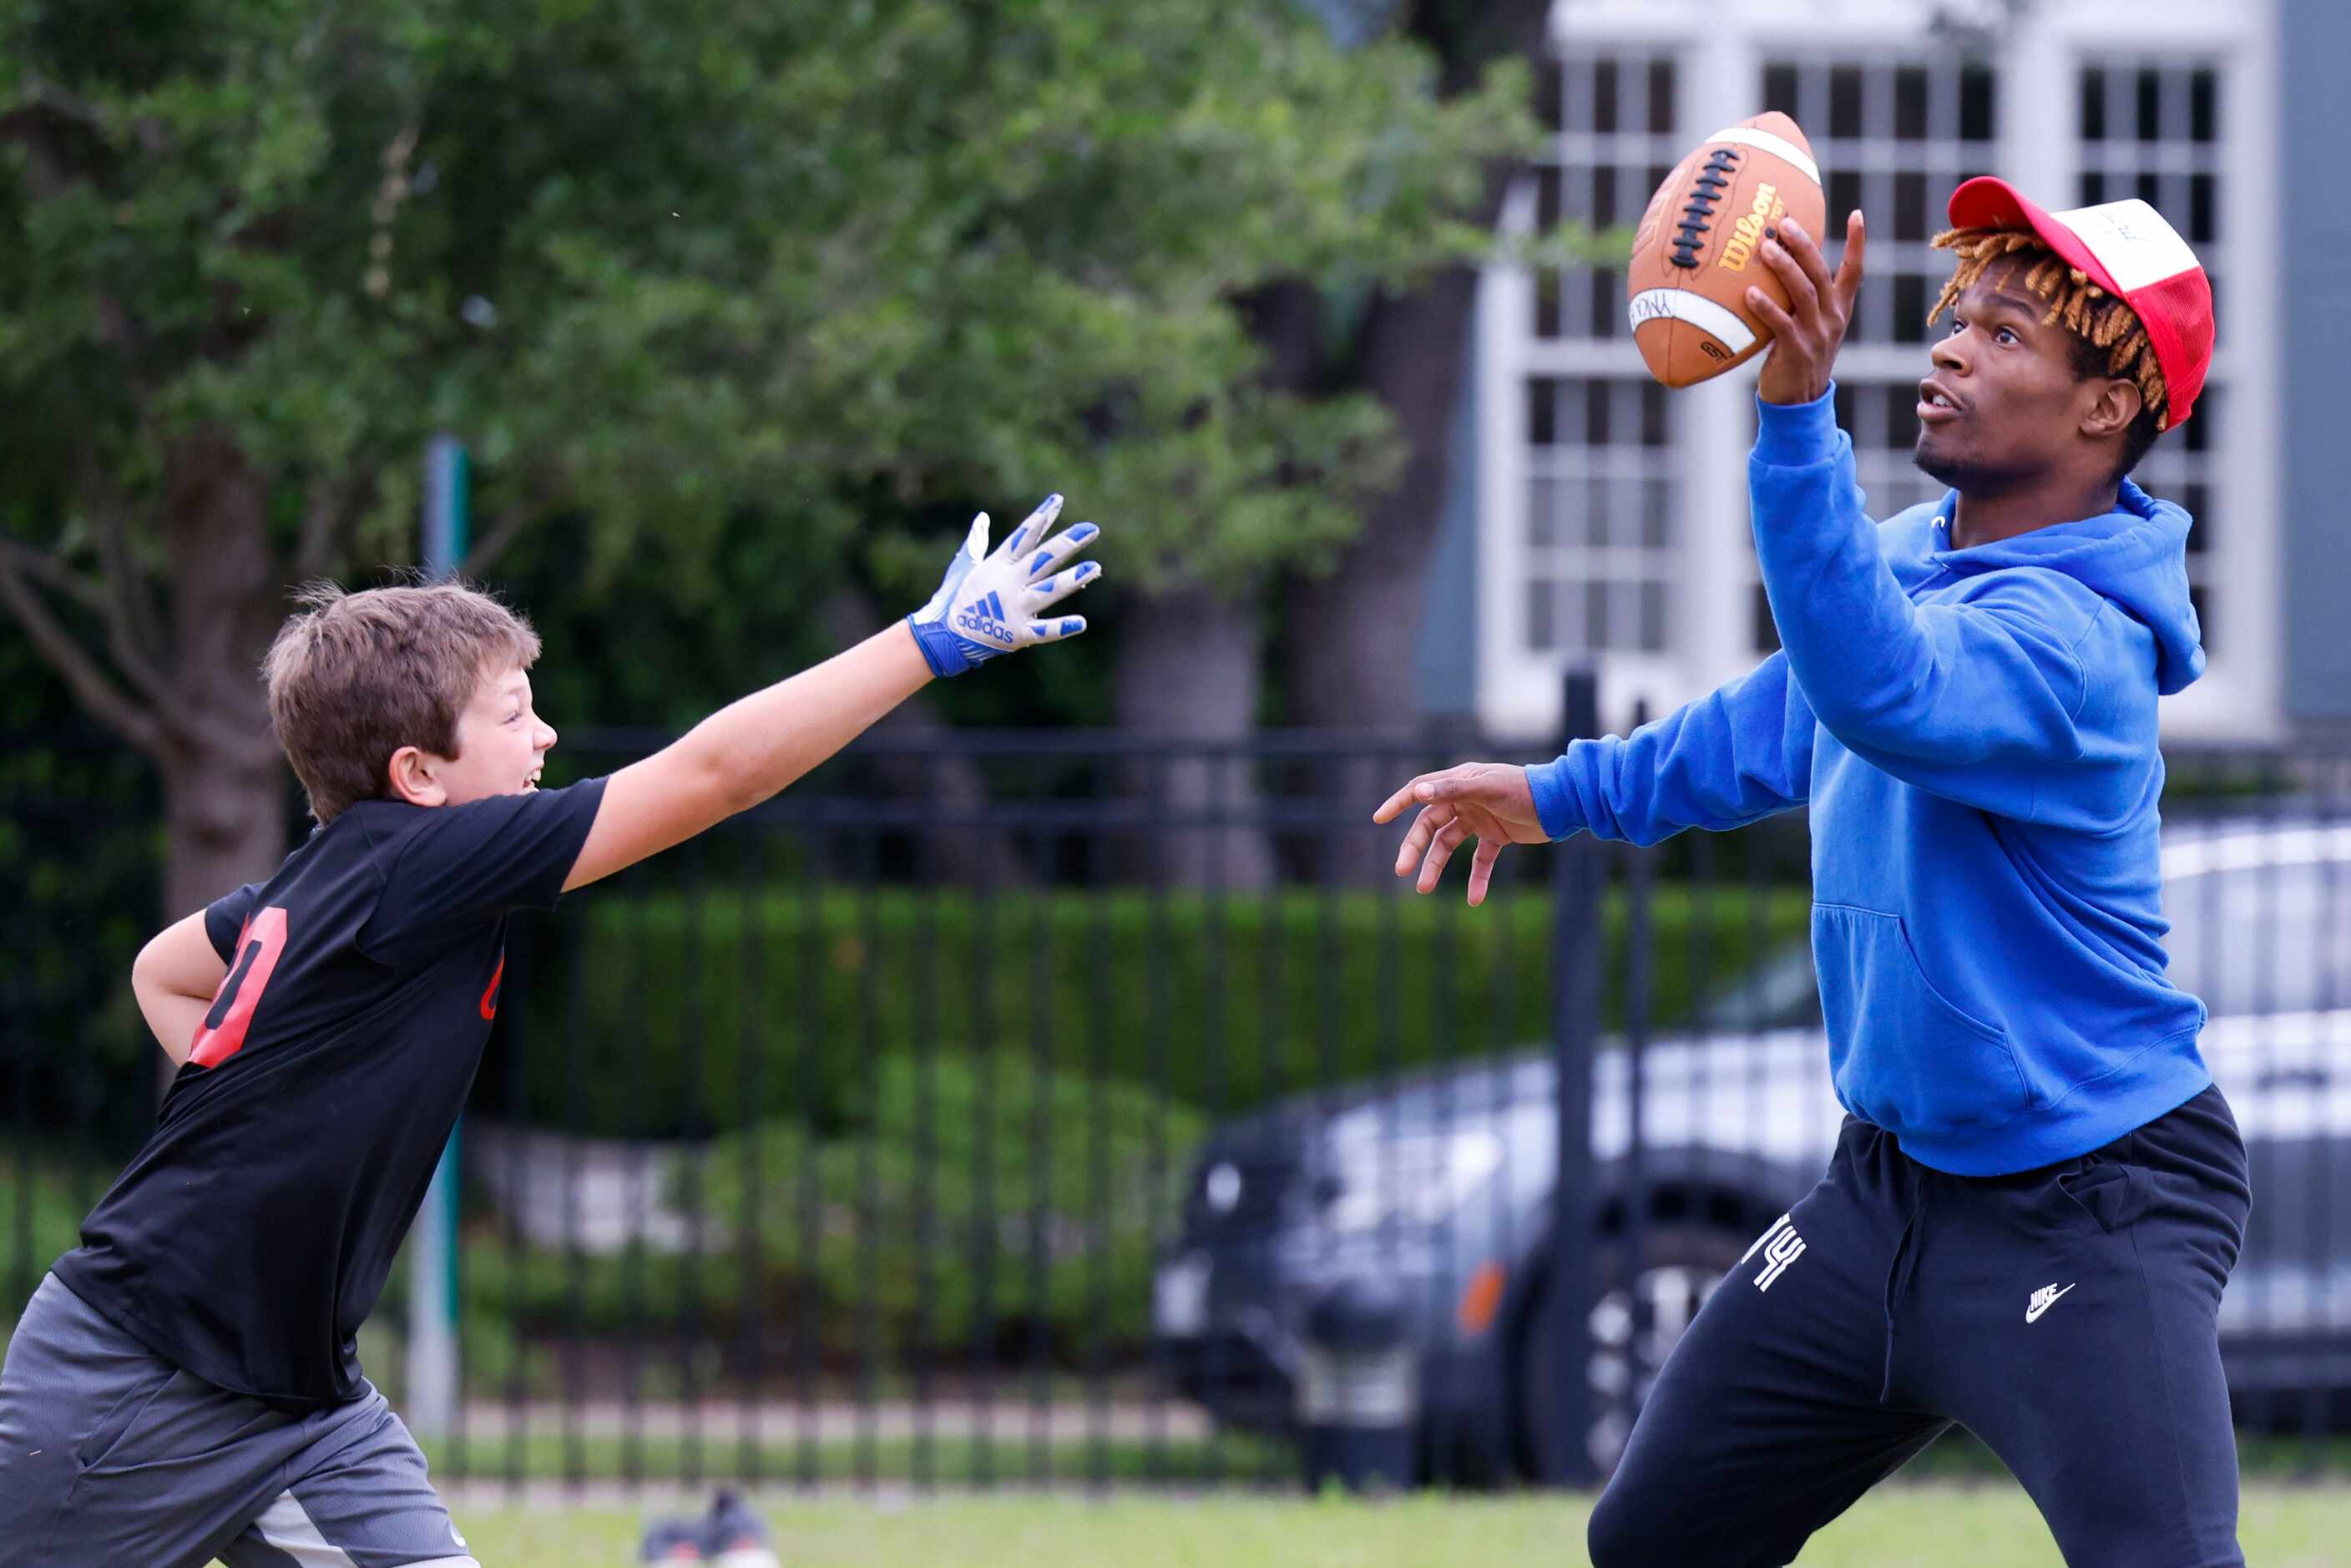 SMU’s Bryan Massey (right) catches the ball during a special session of football drills and...